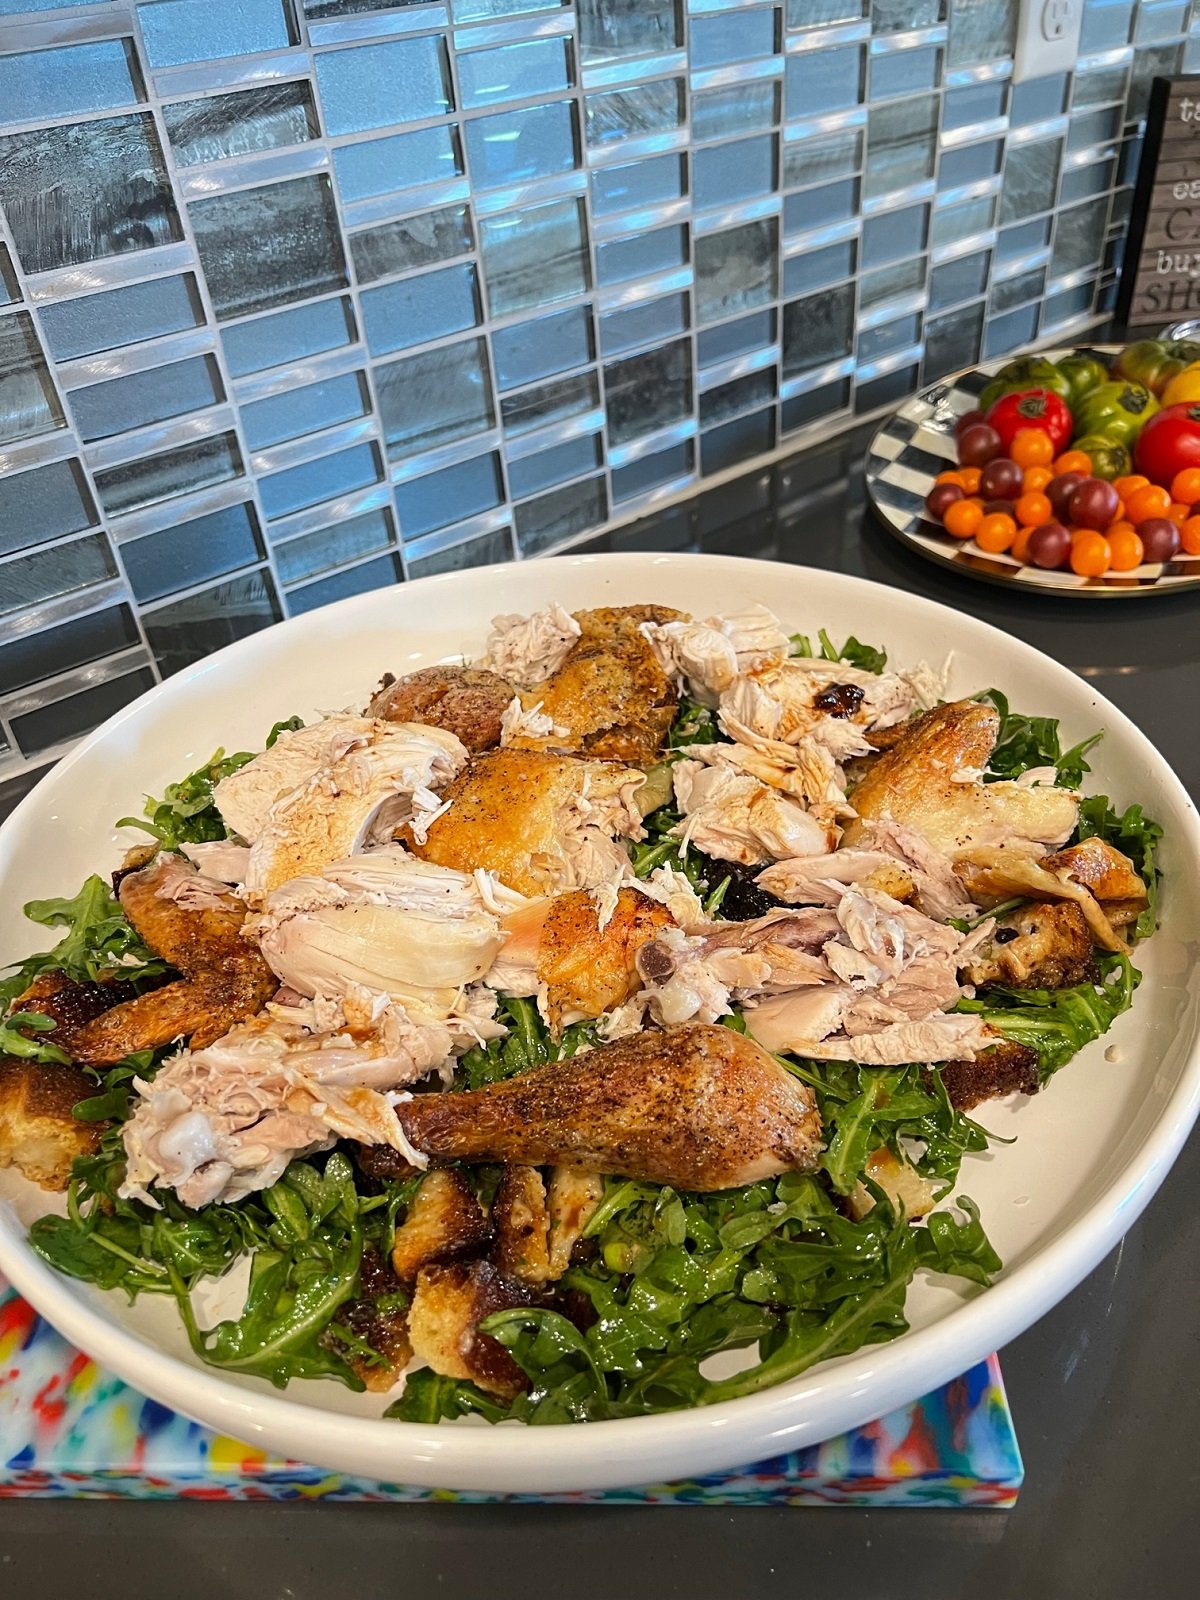 Community Table_Roast Chicken with Bread and Arugula Salad_Camille & Frank_07.jpg